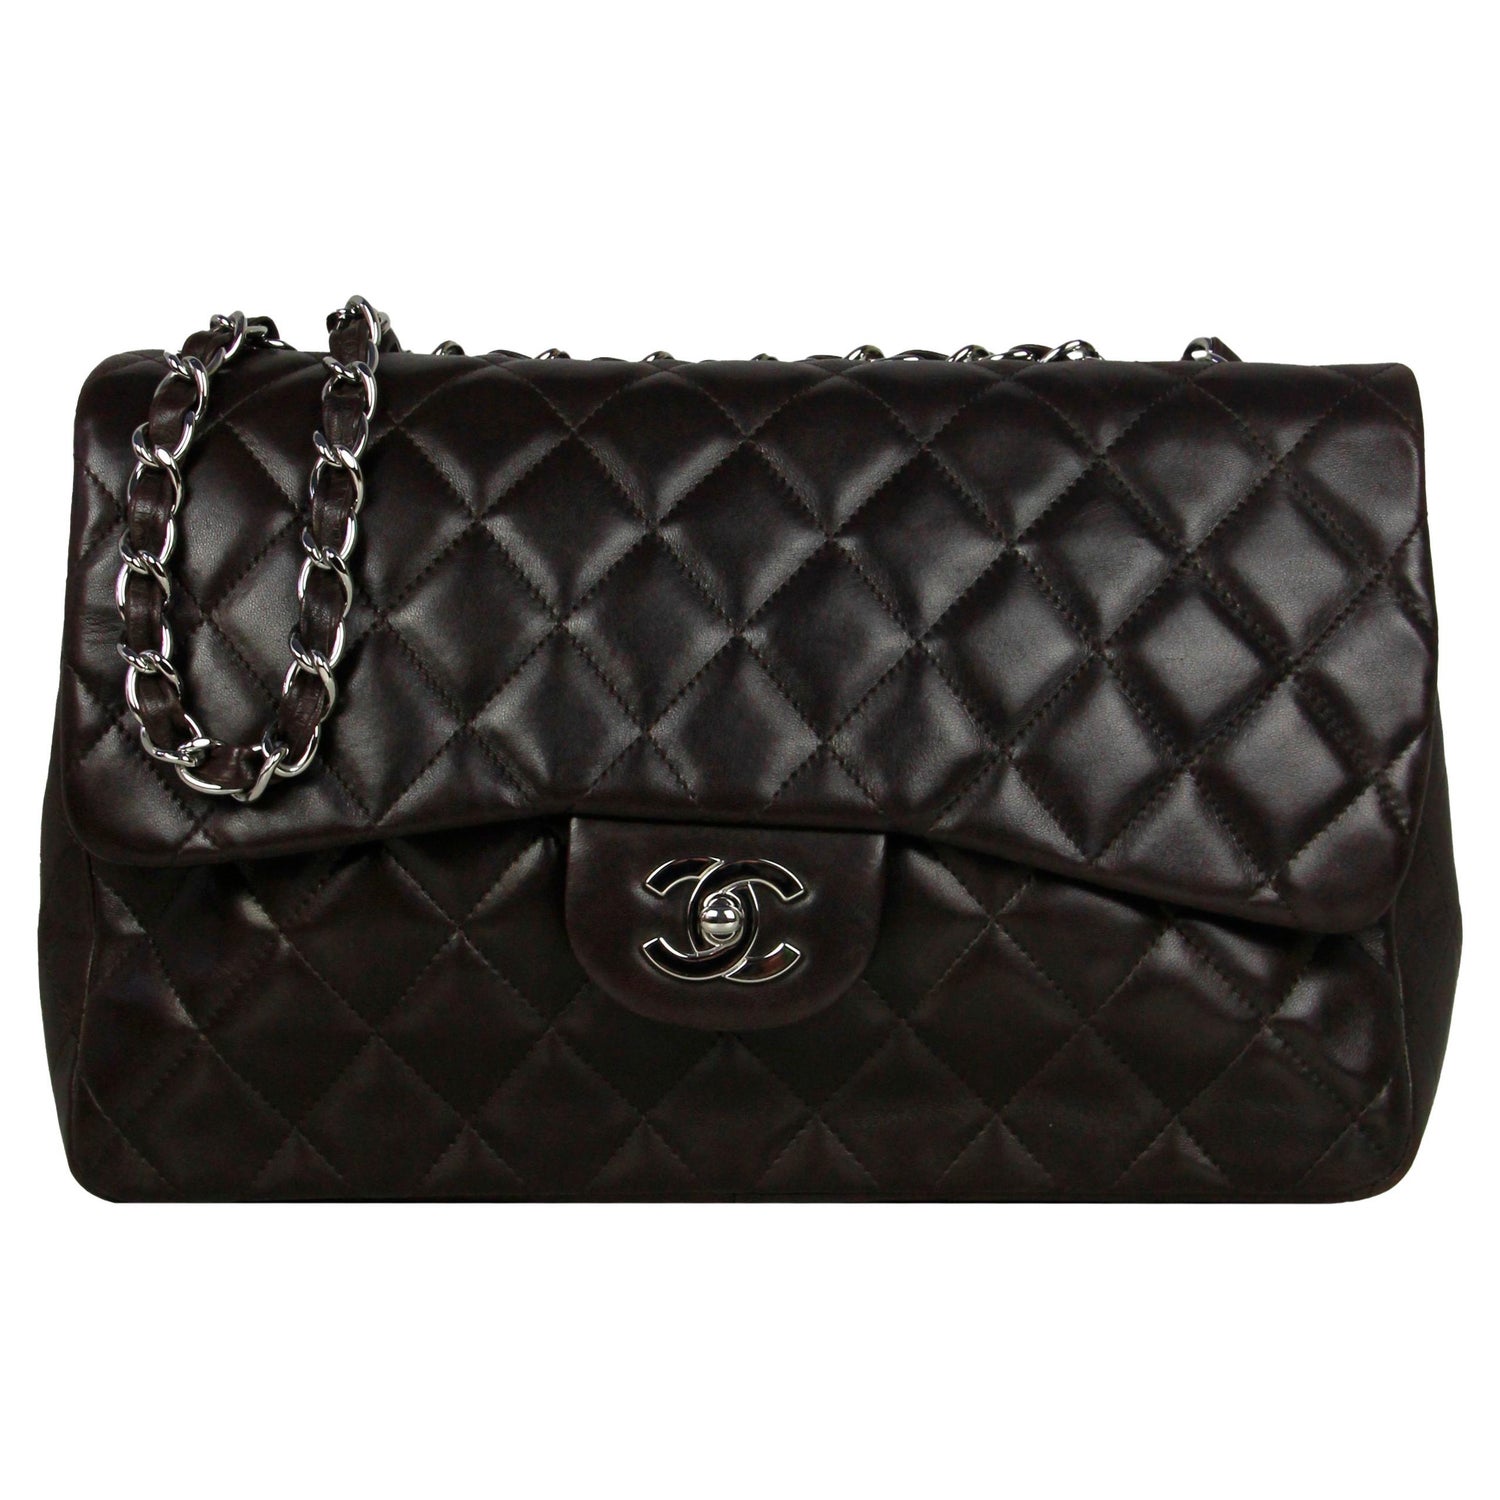 Chanel Like New White Caviar Leather Quilted Classic Double Flap Jumbo Bag